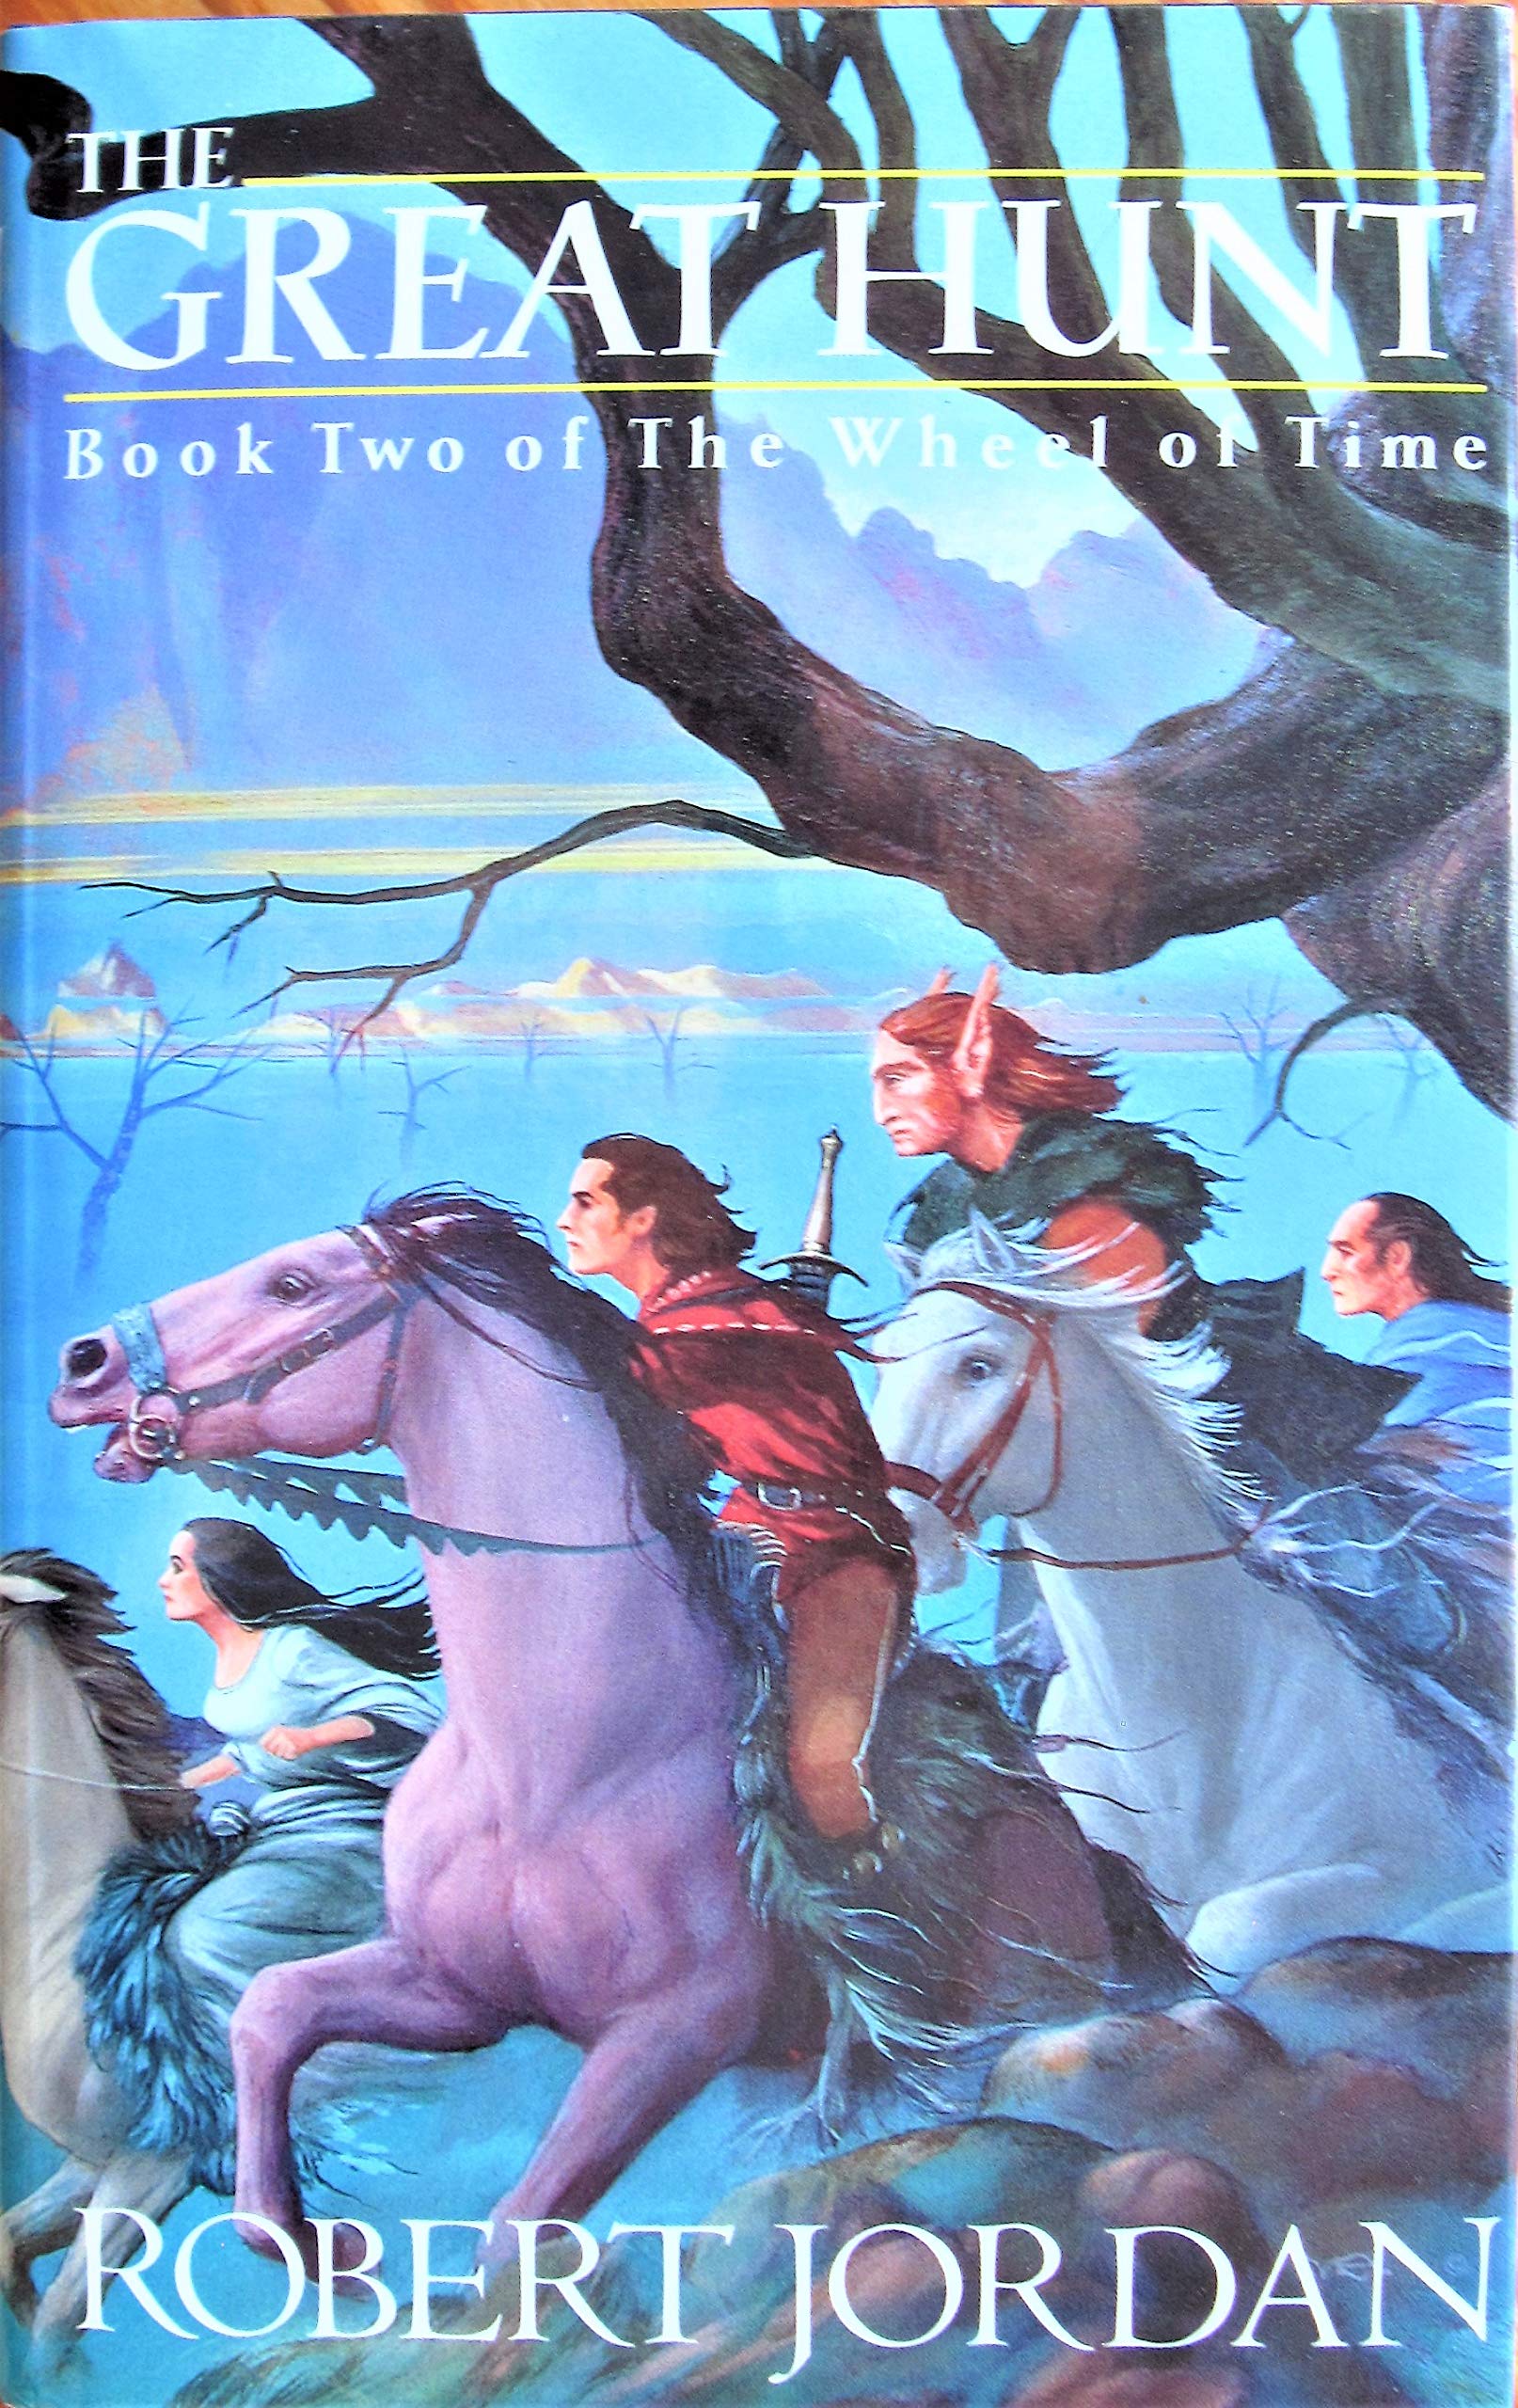 The Wheel of Time 2: The Great Hunt - Booksondemand